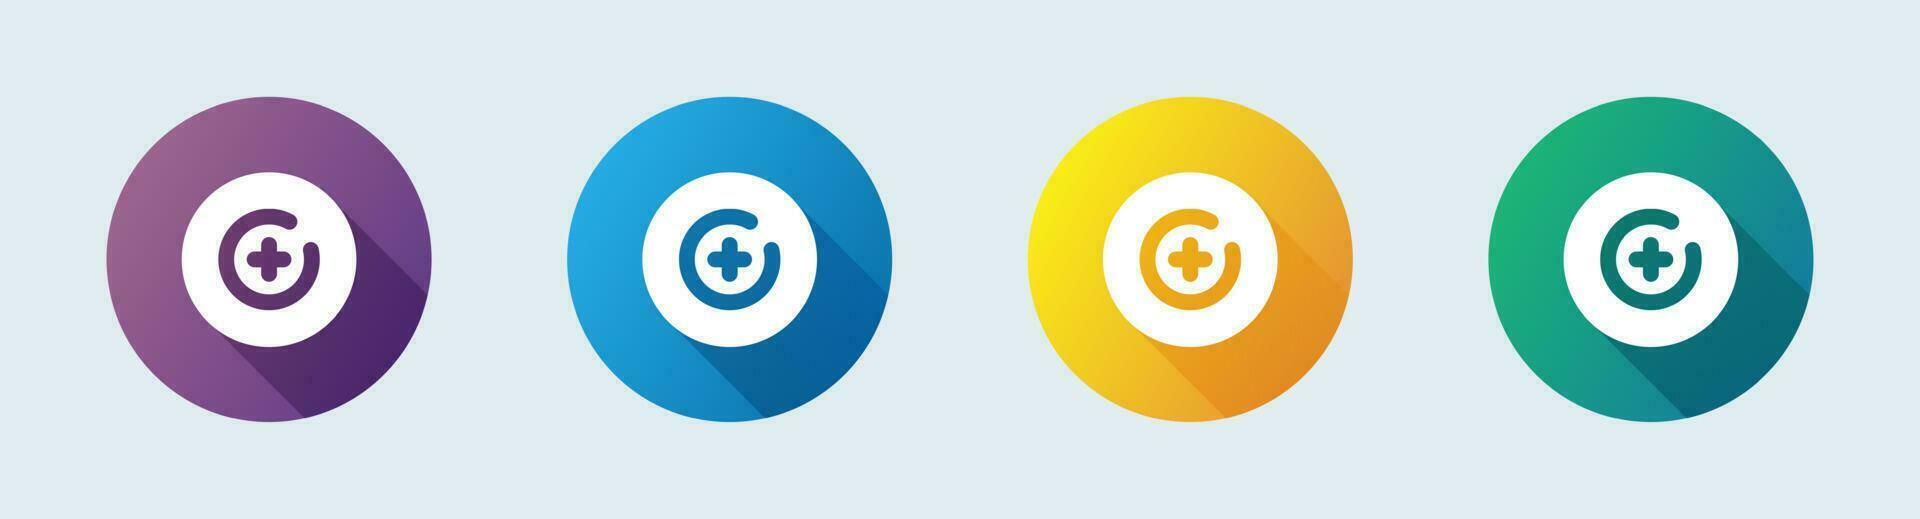 Target solid icon in flat design style. Goal signs vector illustration.